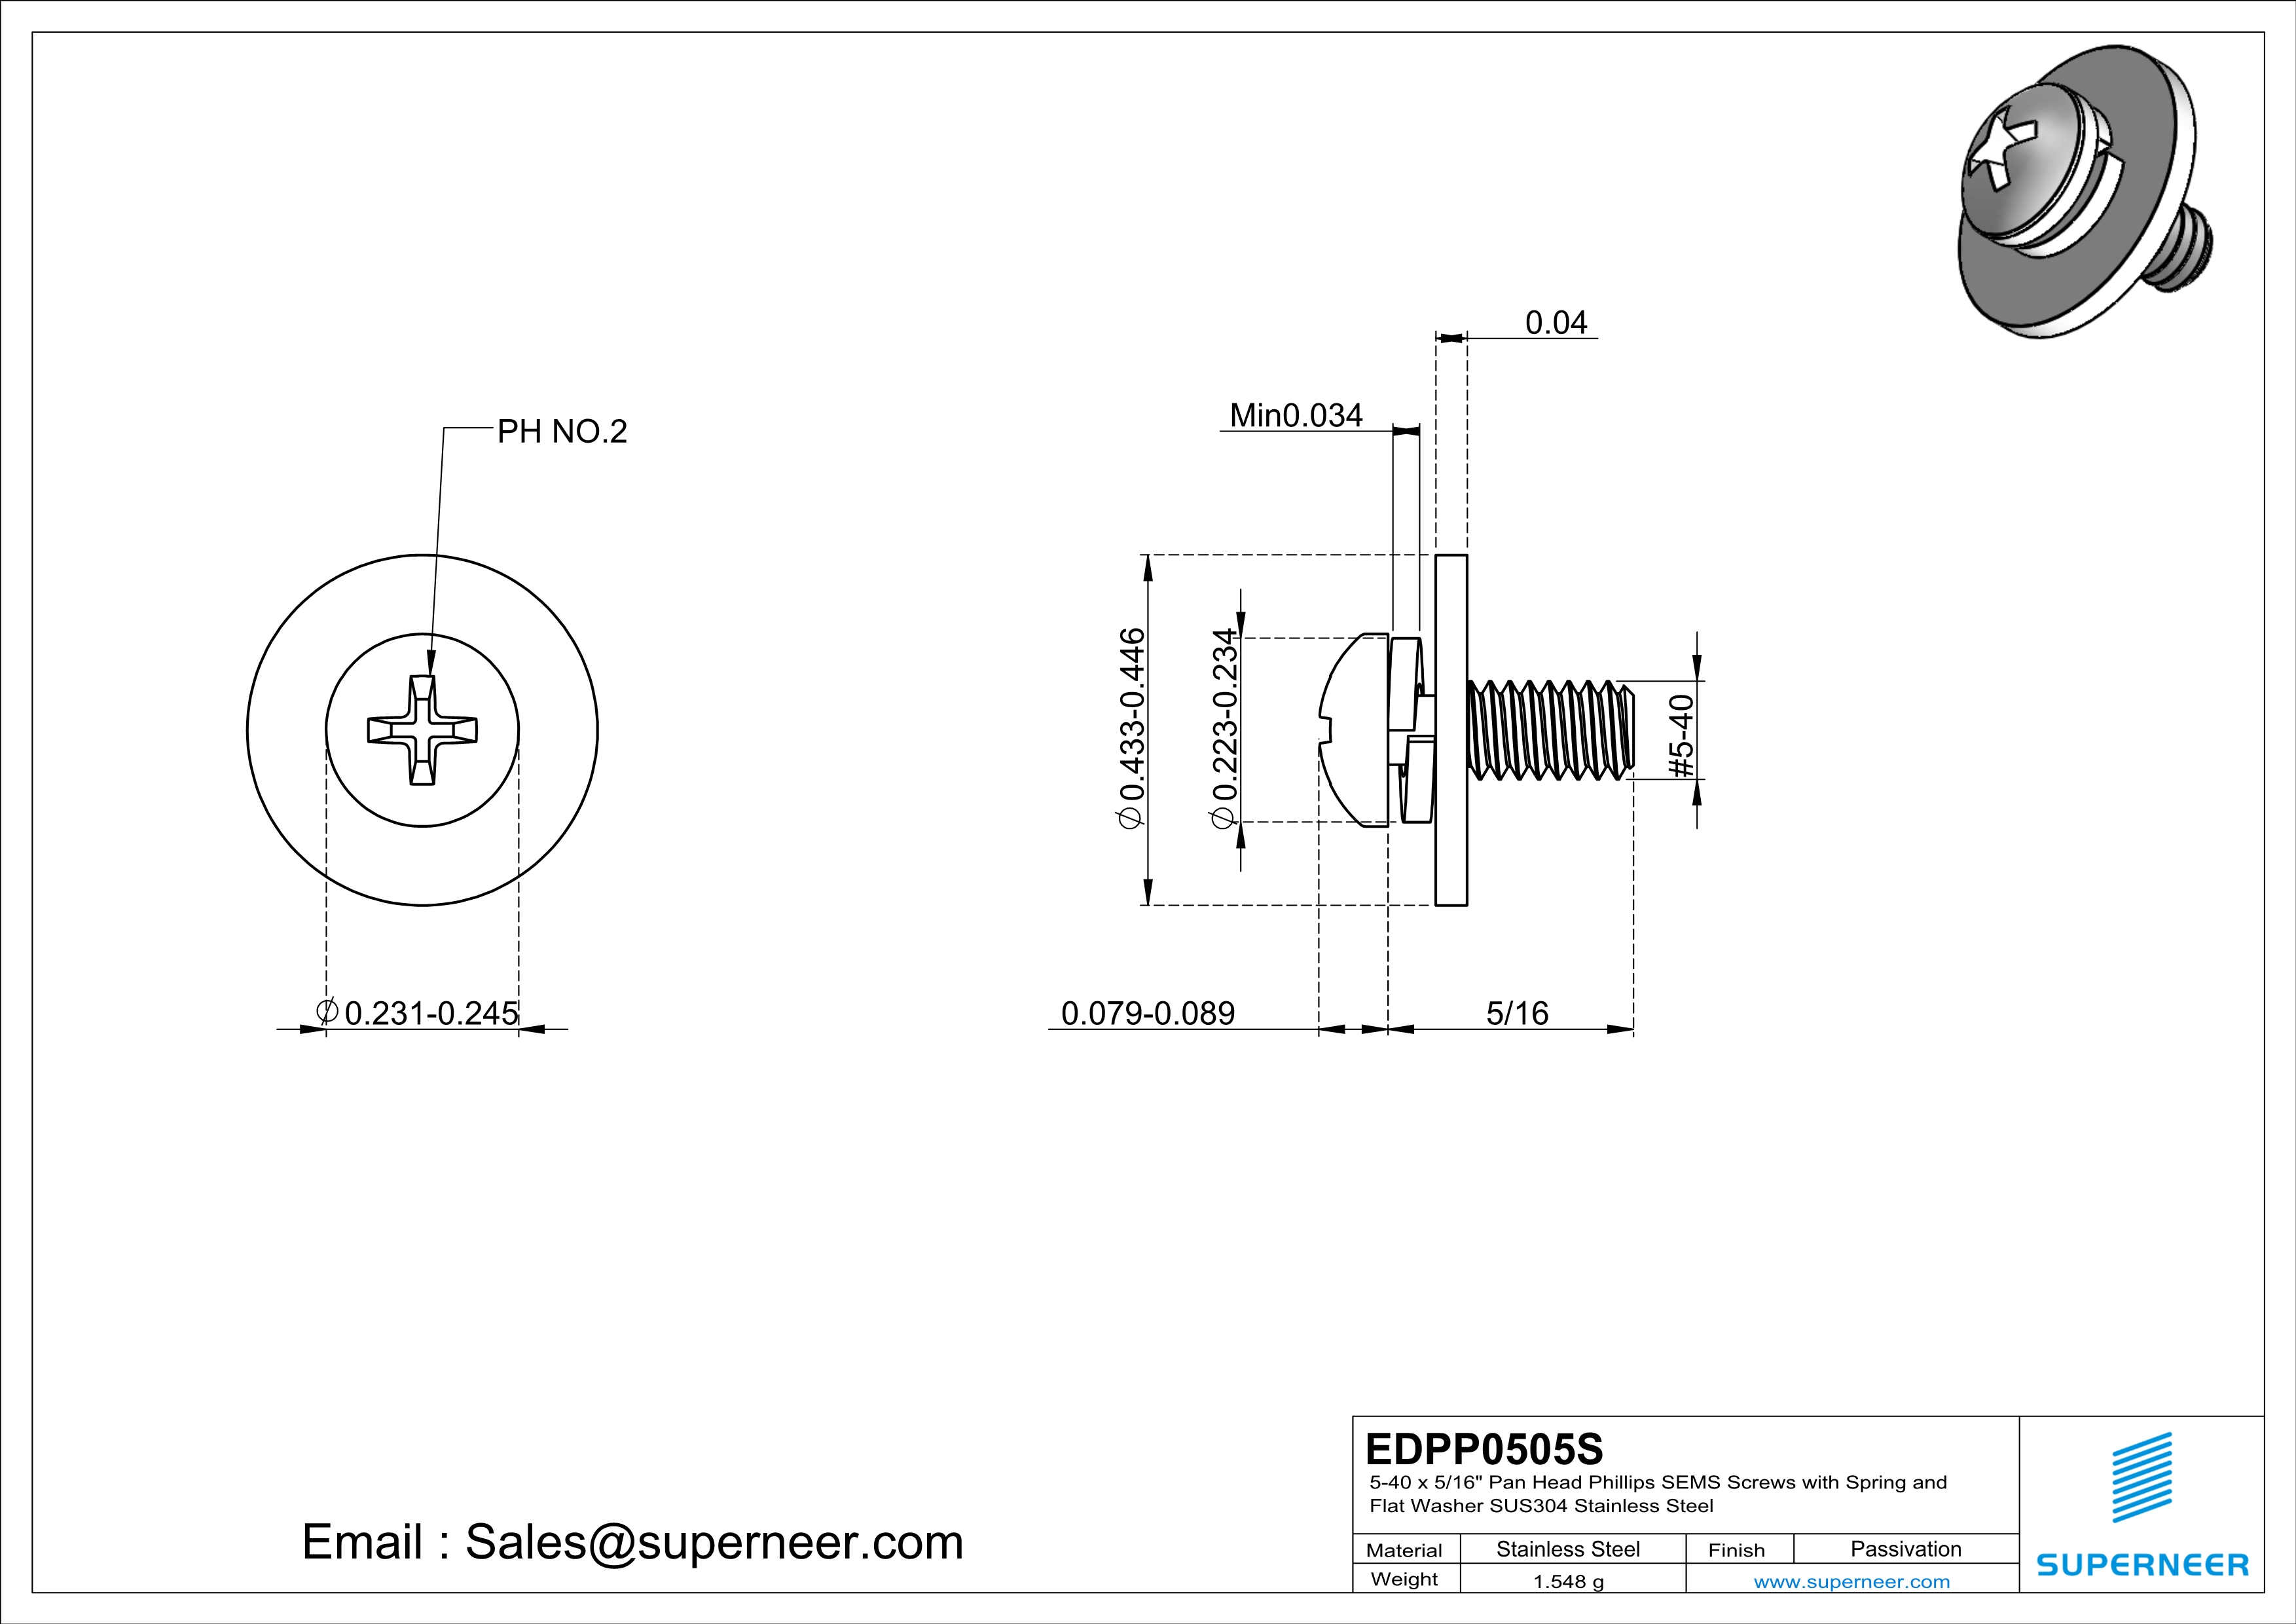 5-40 x 5/16" Pan Head Phillips SEMS Screws with Spring and Flat Washer SUS304 Stainless Steel Inox